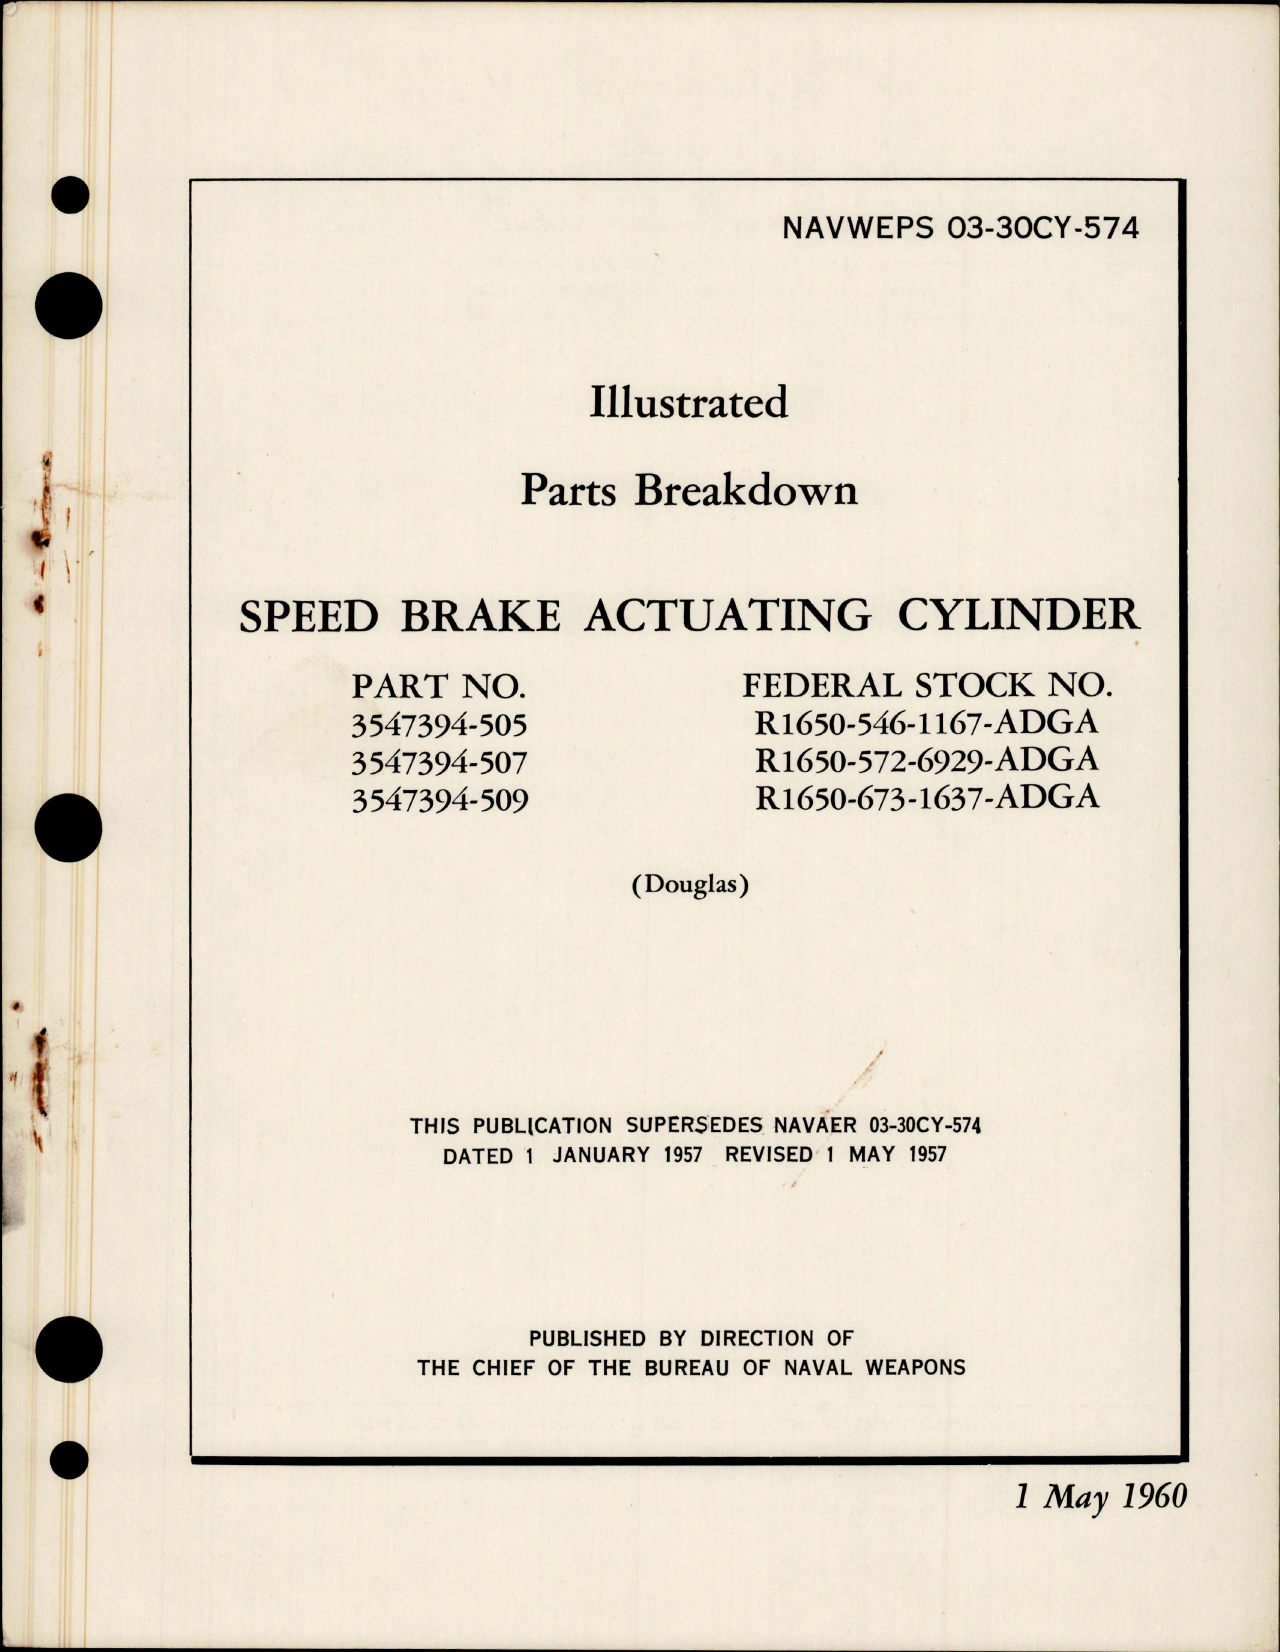 Sample page 1 from AirCorps Library document: Illustrated Parts Breakdown for Speed Brake Actuating Cylinder 